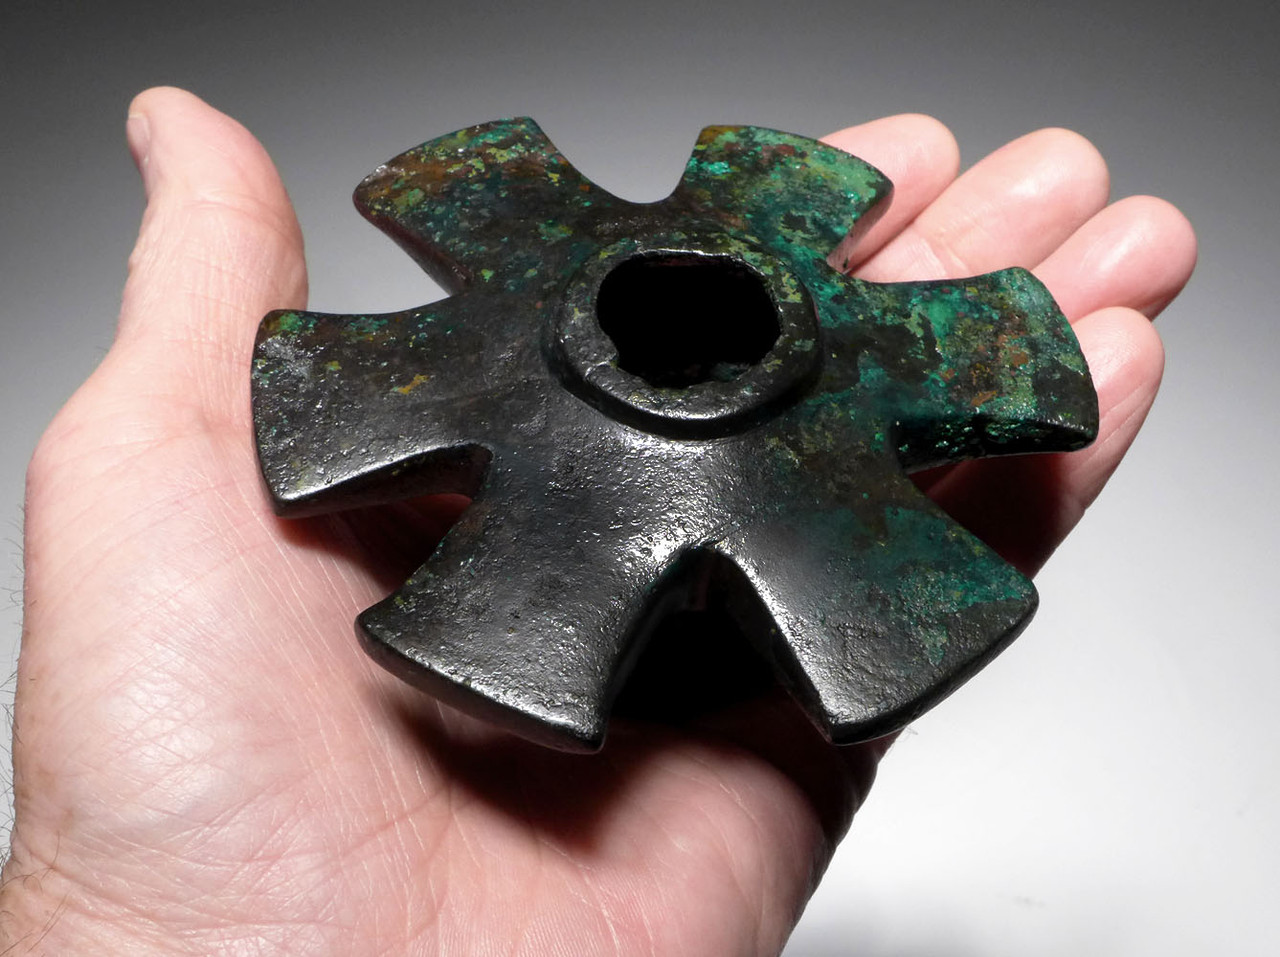 MASSIVE MUSEUM-CLASS ANCIENT LURISTAN BRONZE RADIAL BLADE DISK MACE FROM THE NEAR EAST *LUR271